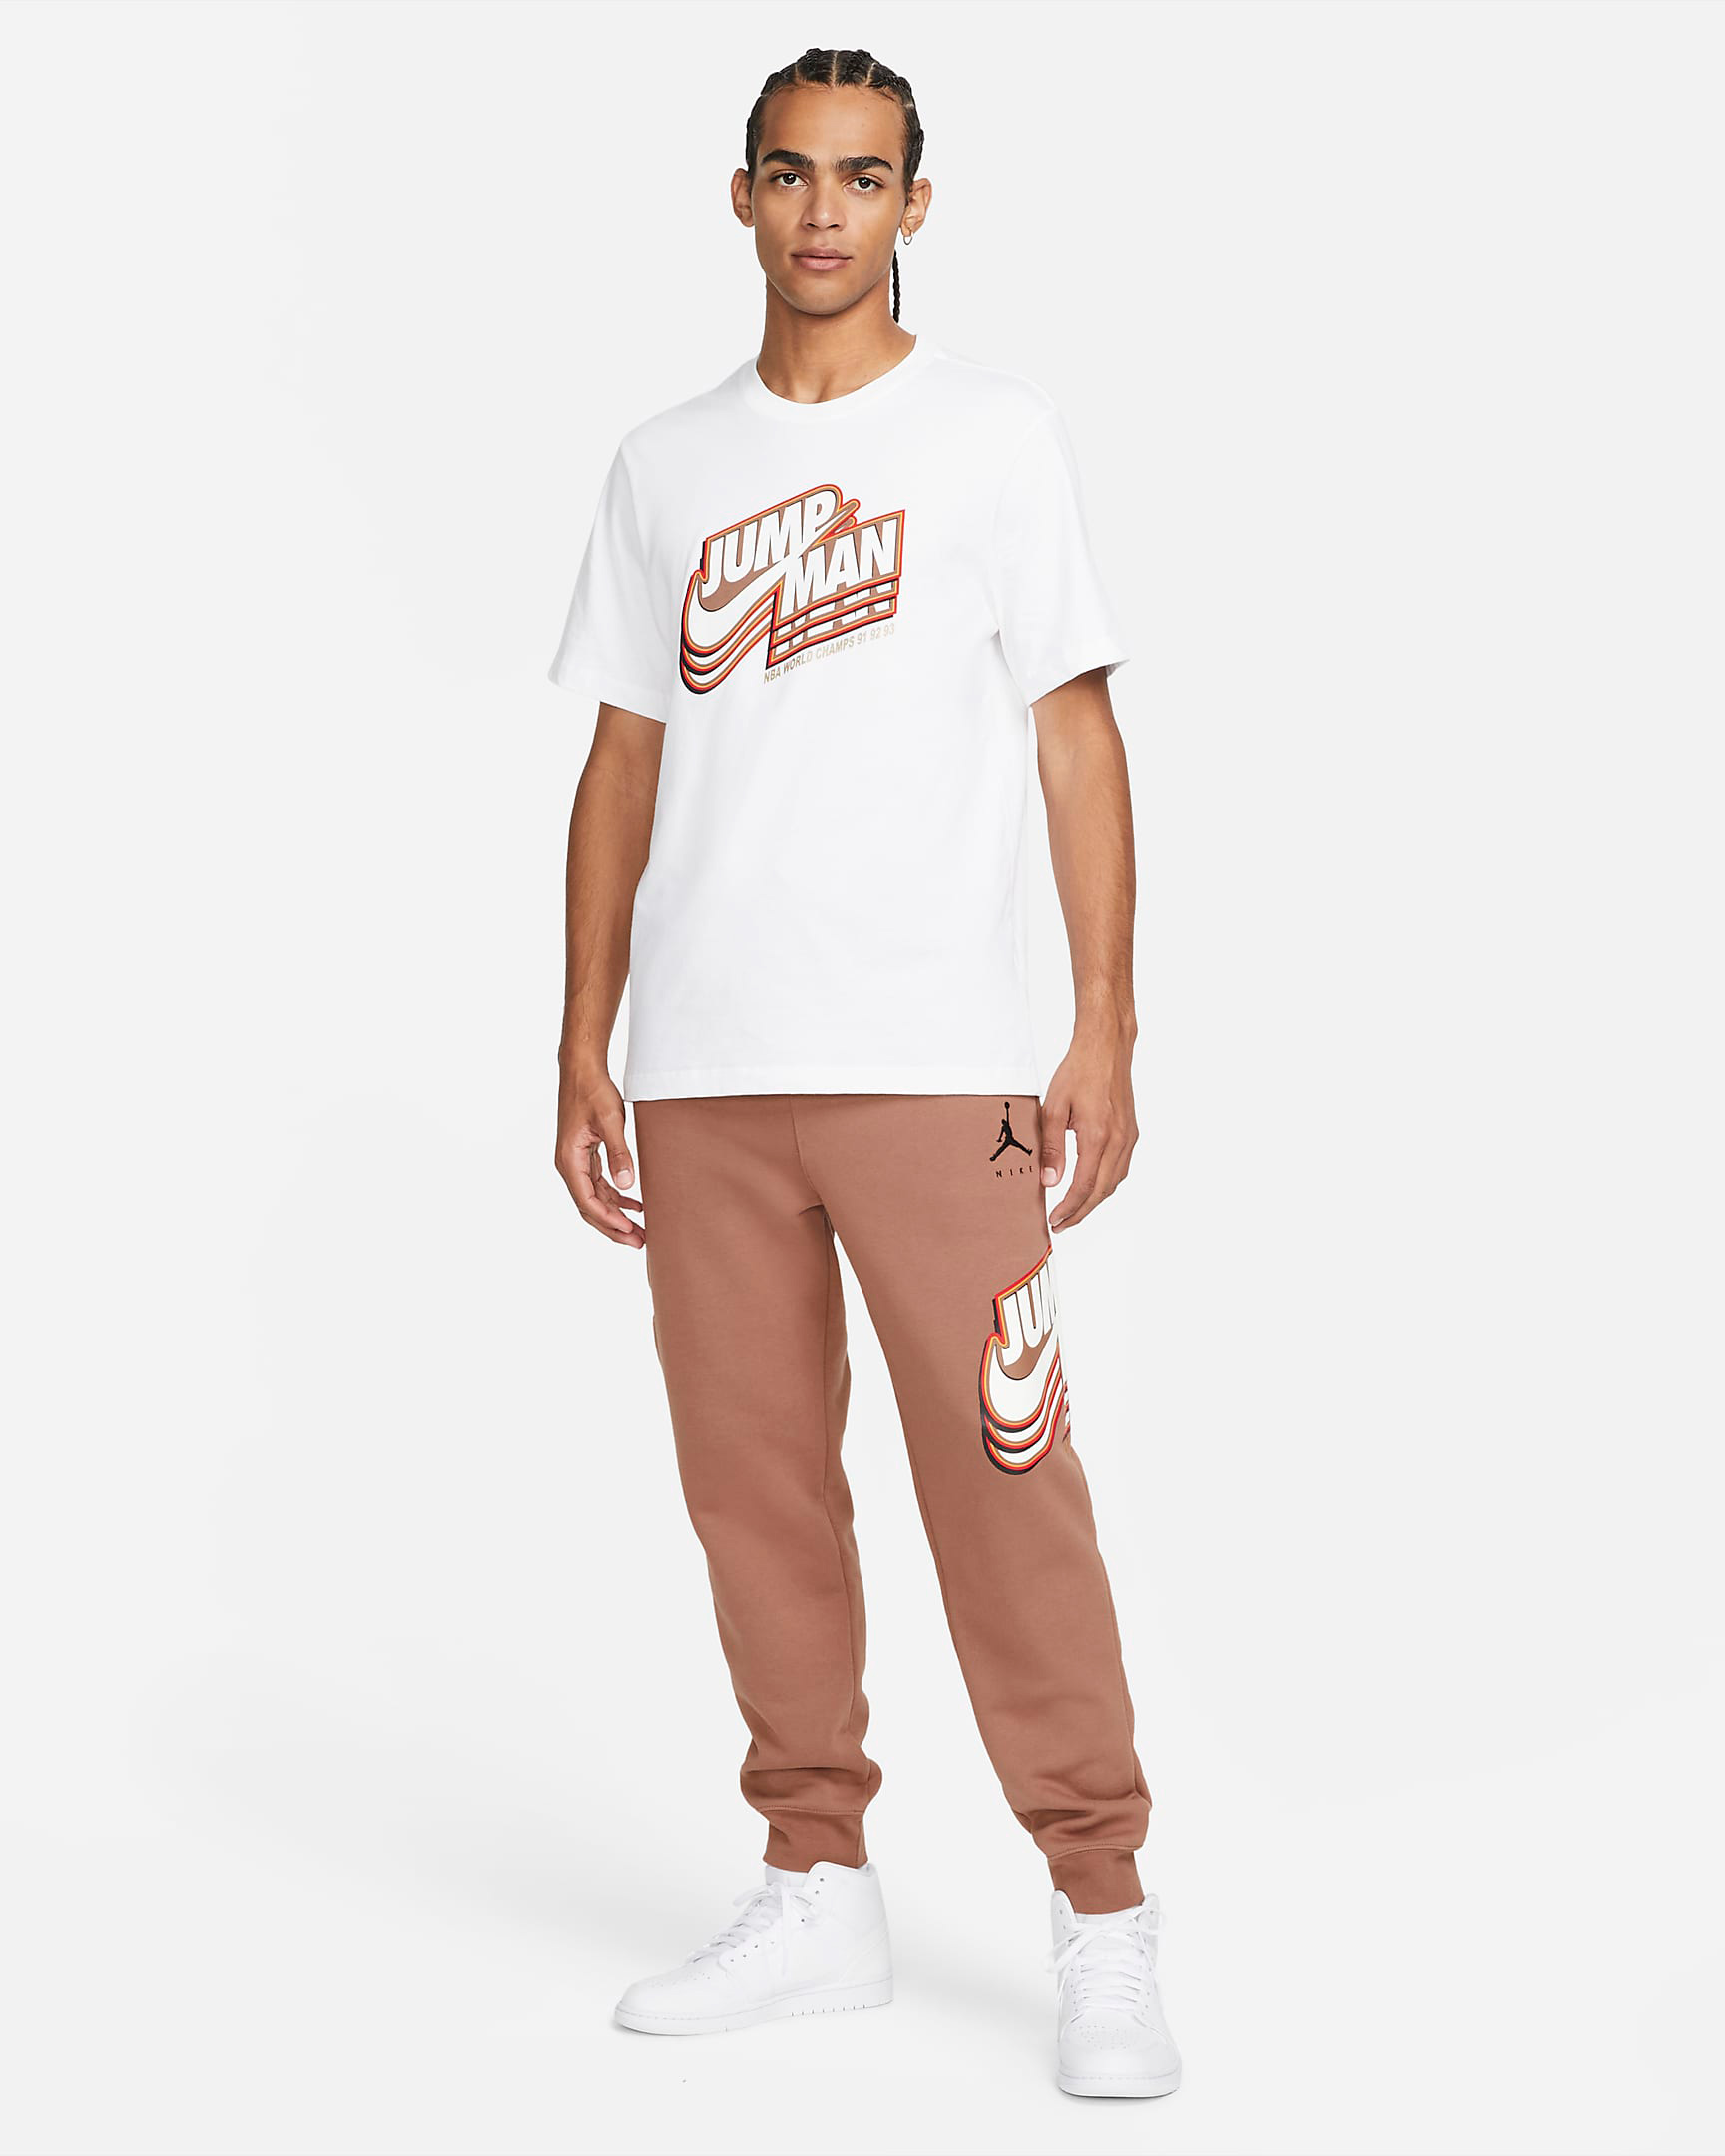 air-jordan-14-winterized-shirt-white-archaeo-brown-pants-outfit